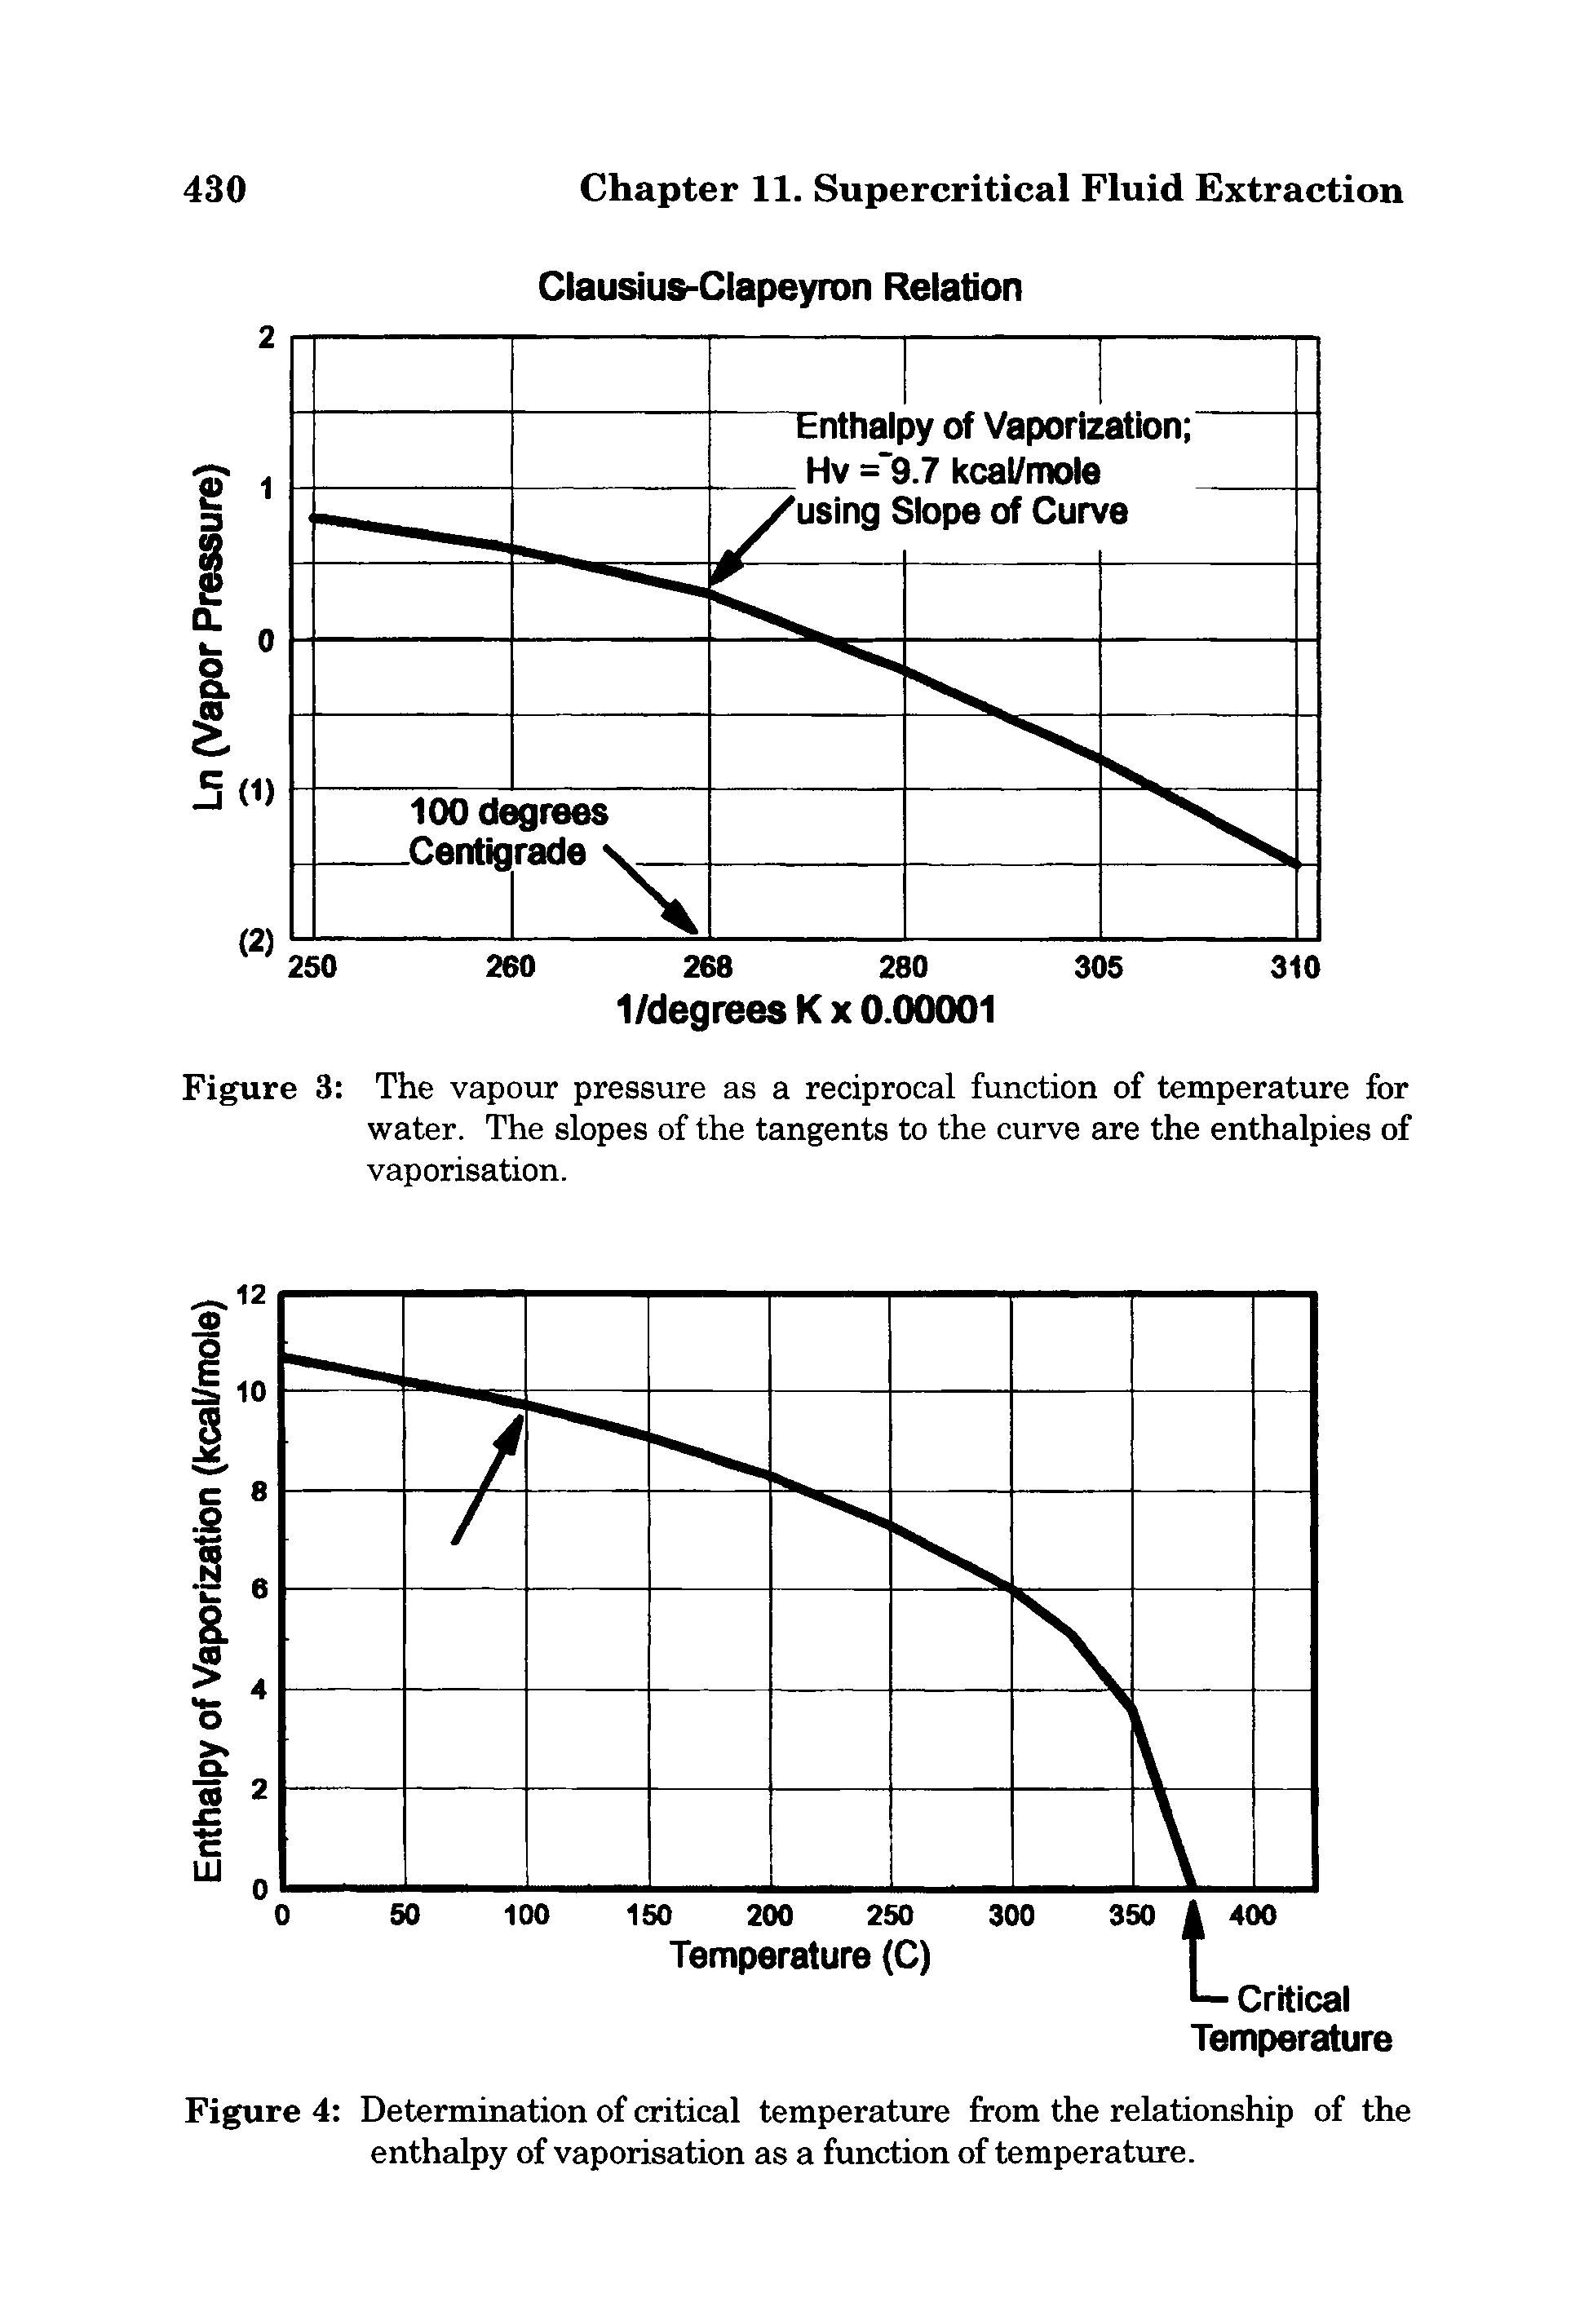 Figure 4 Determination of critical temperatiue from the relationship of the enthalpy of vaporisation as a function of temperatm-e.